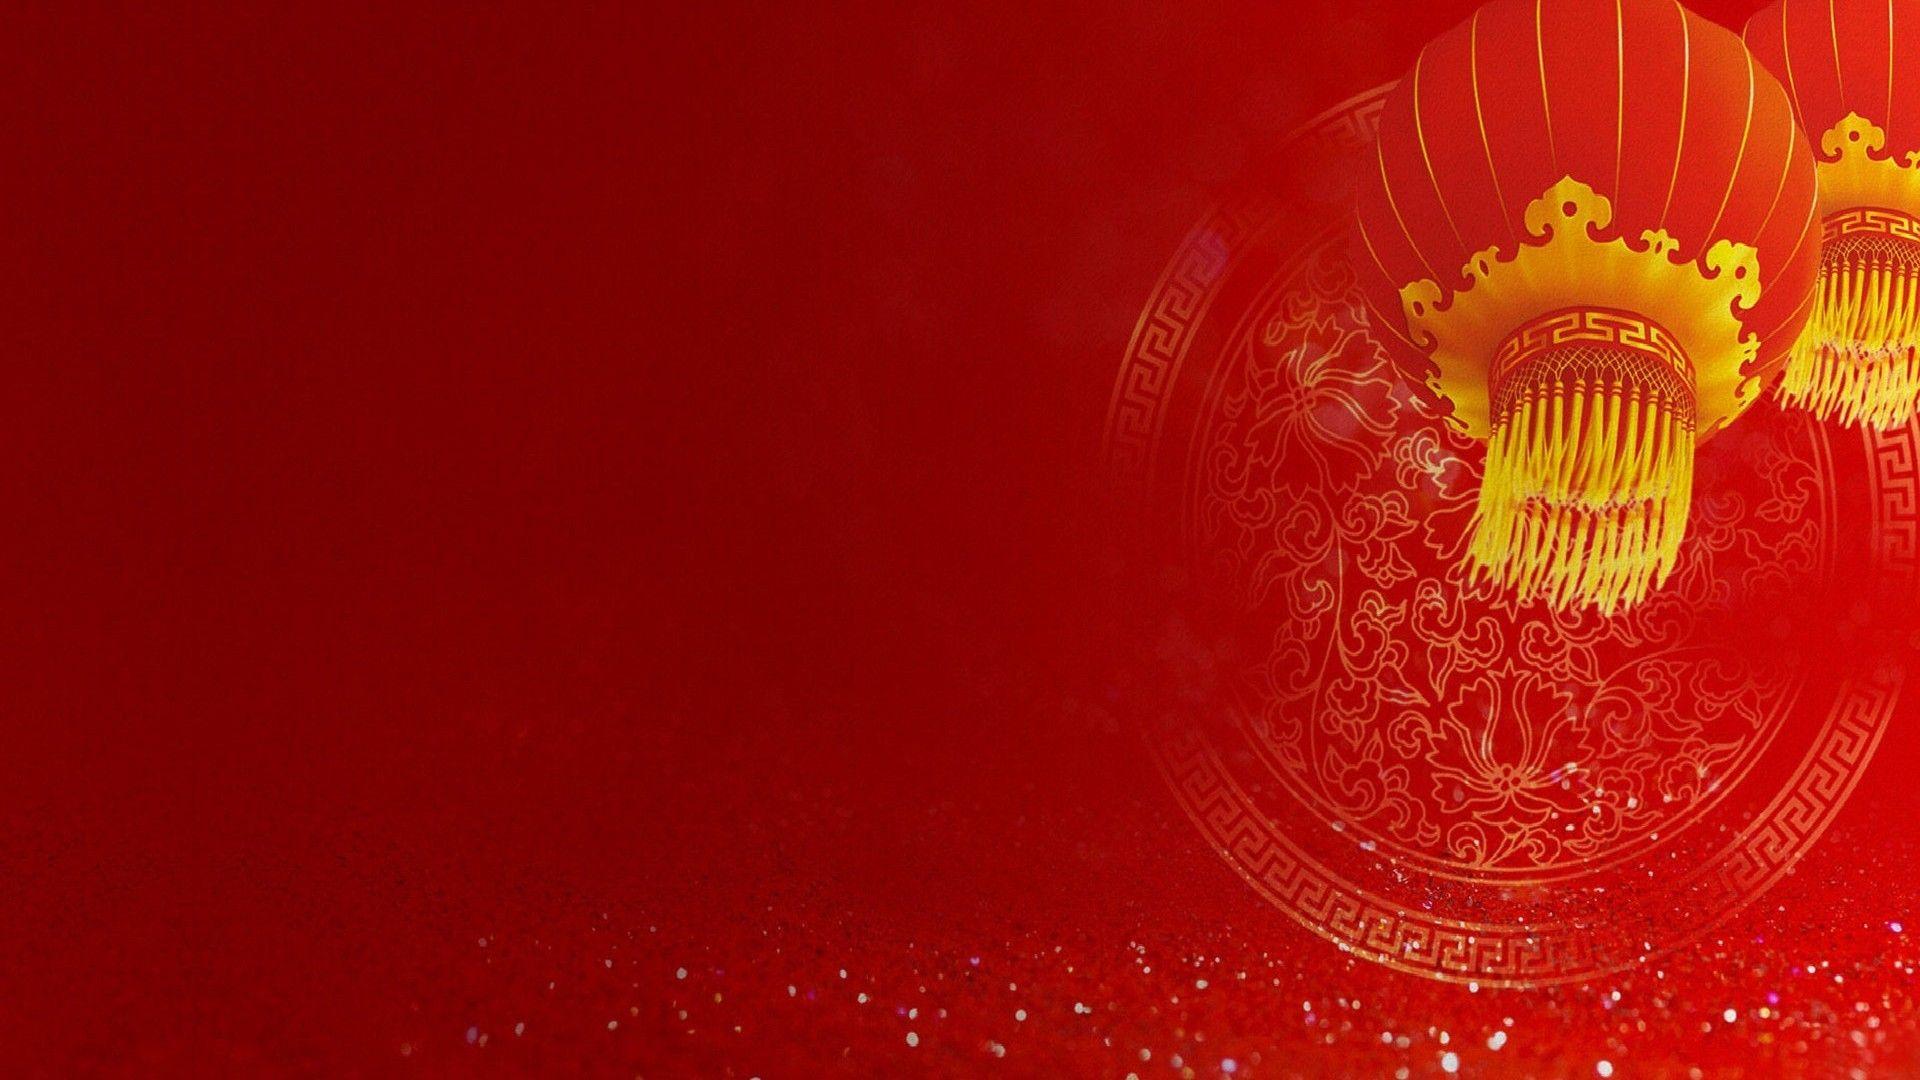 Chinese backgroundDownload free amazing full HD background